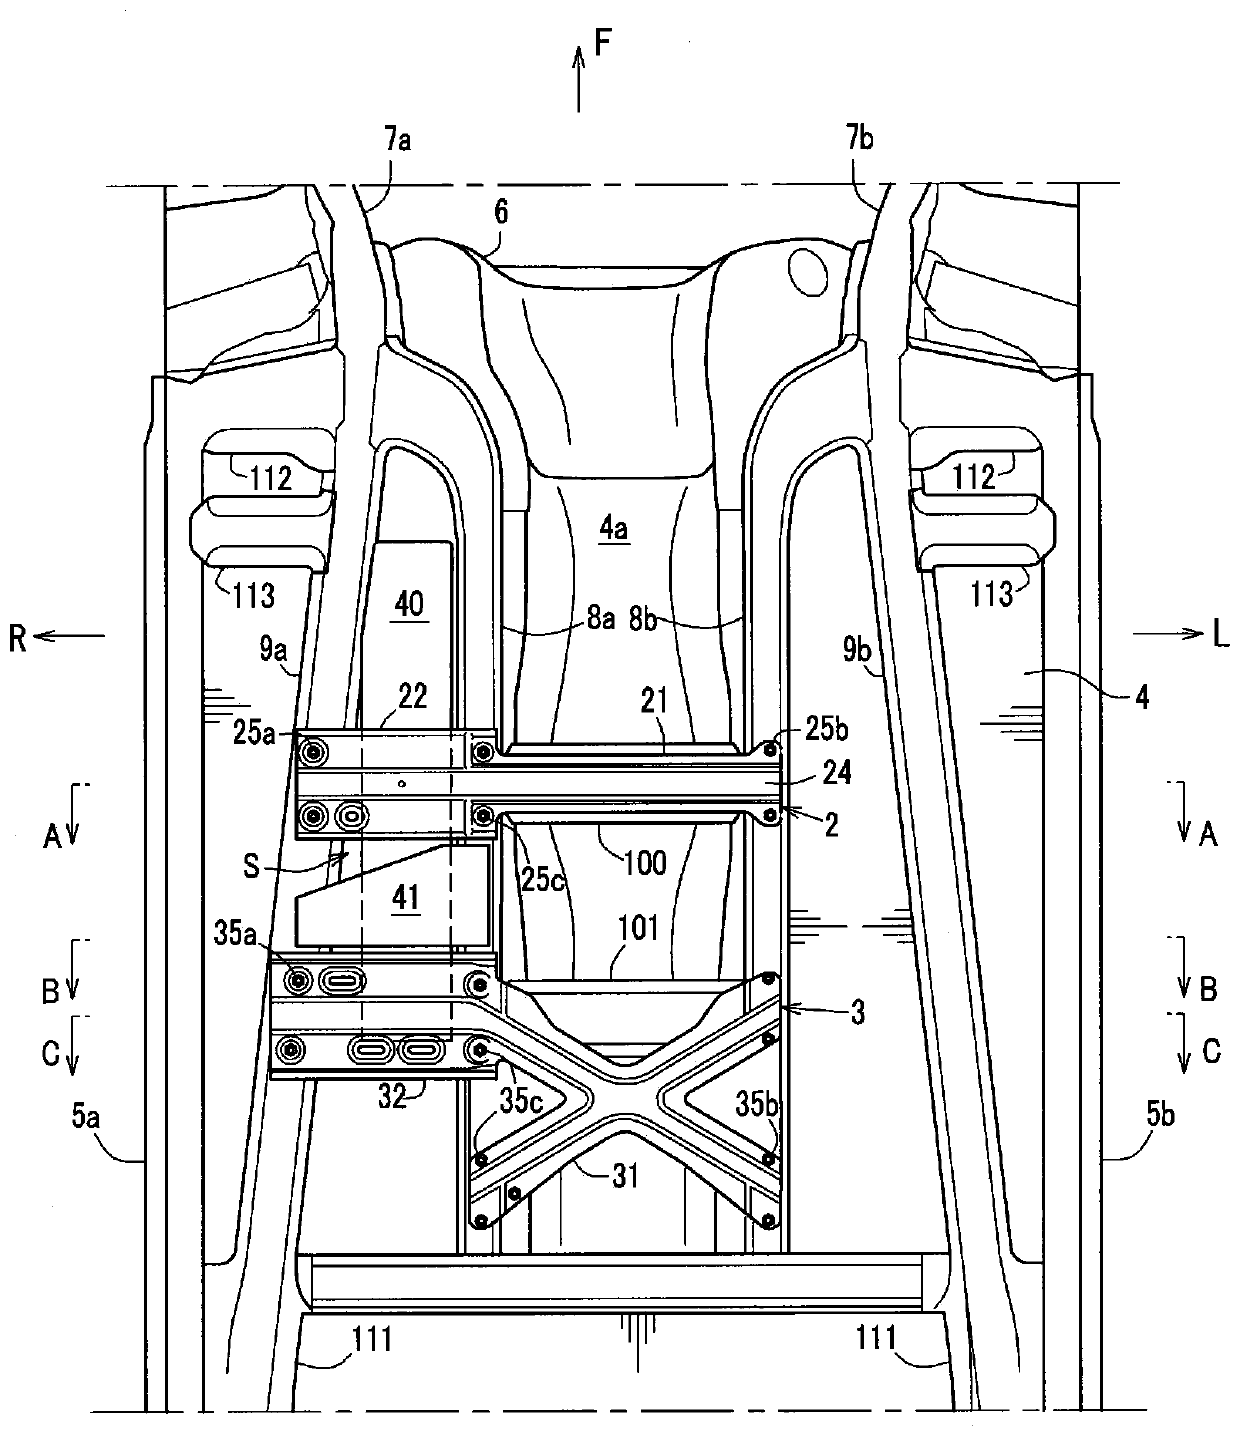 Underbody structure of automobile